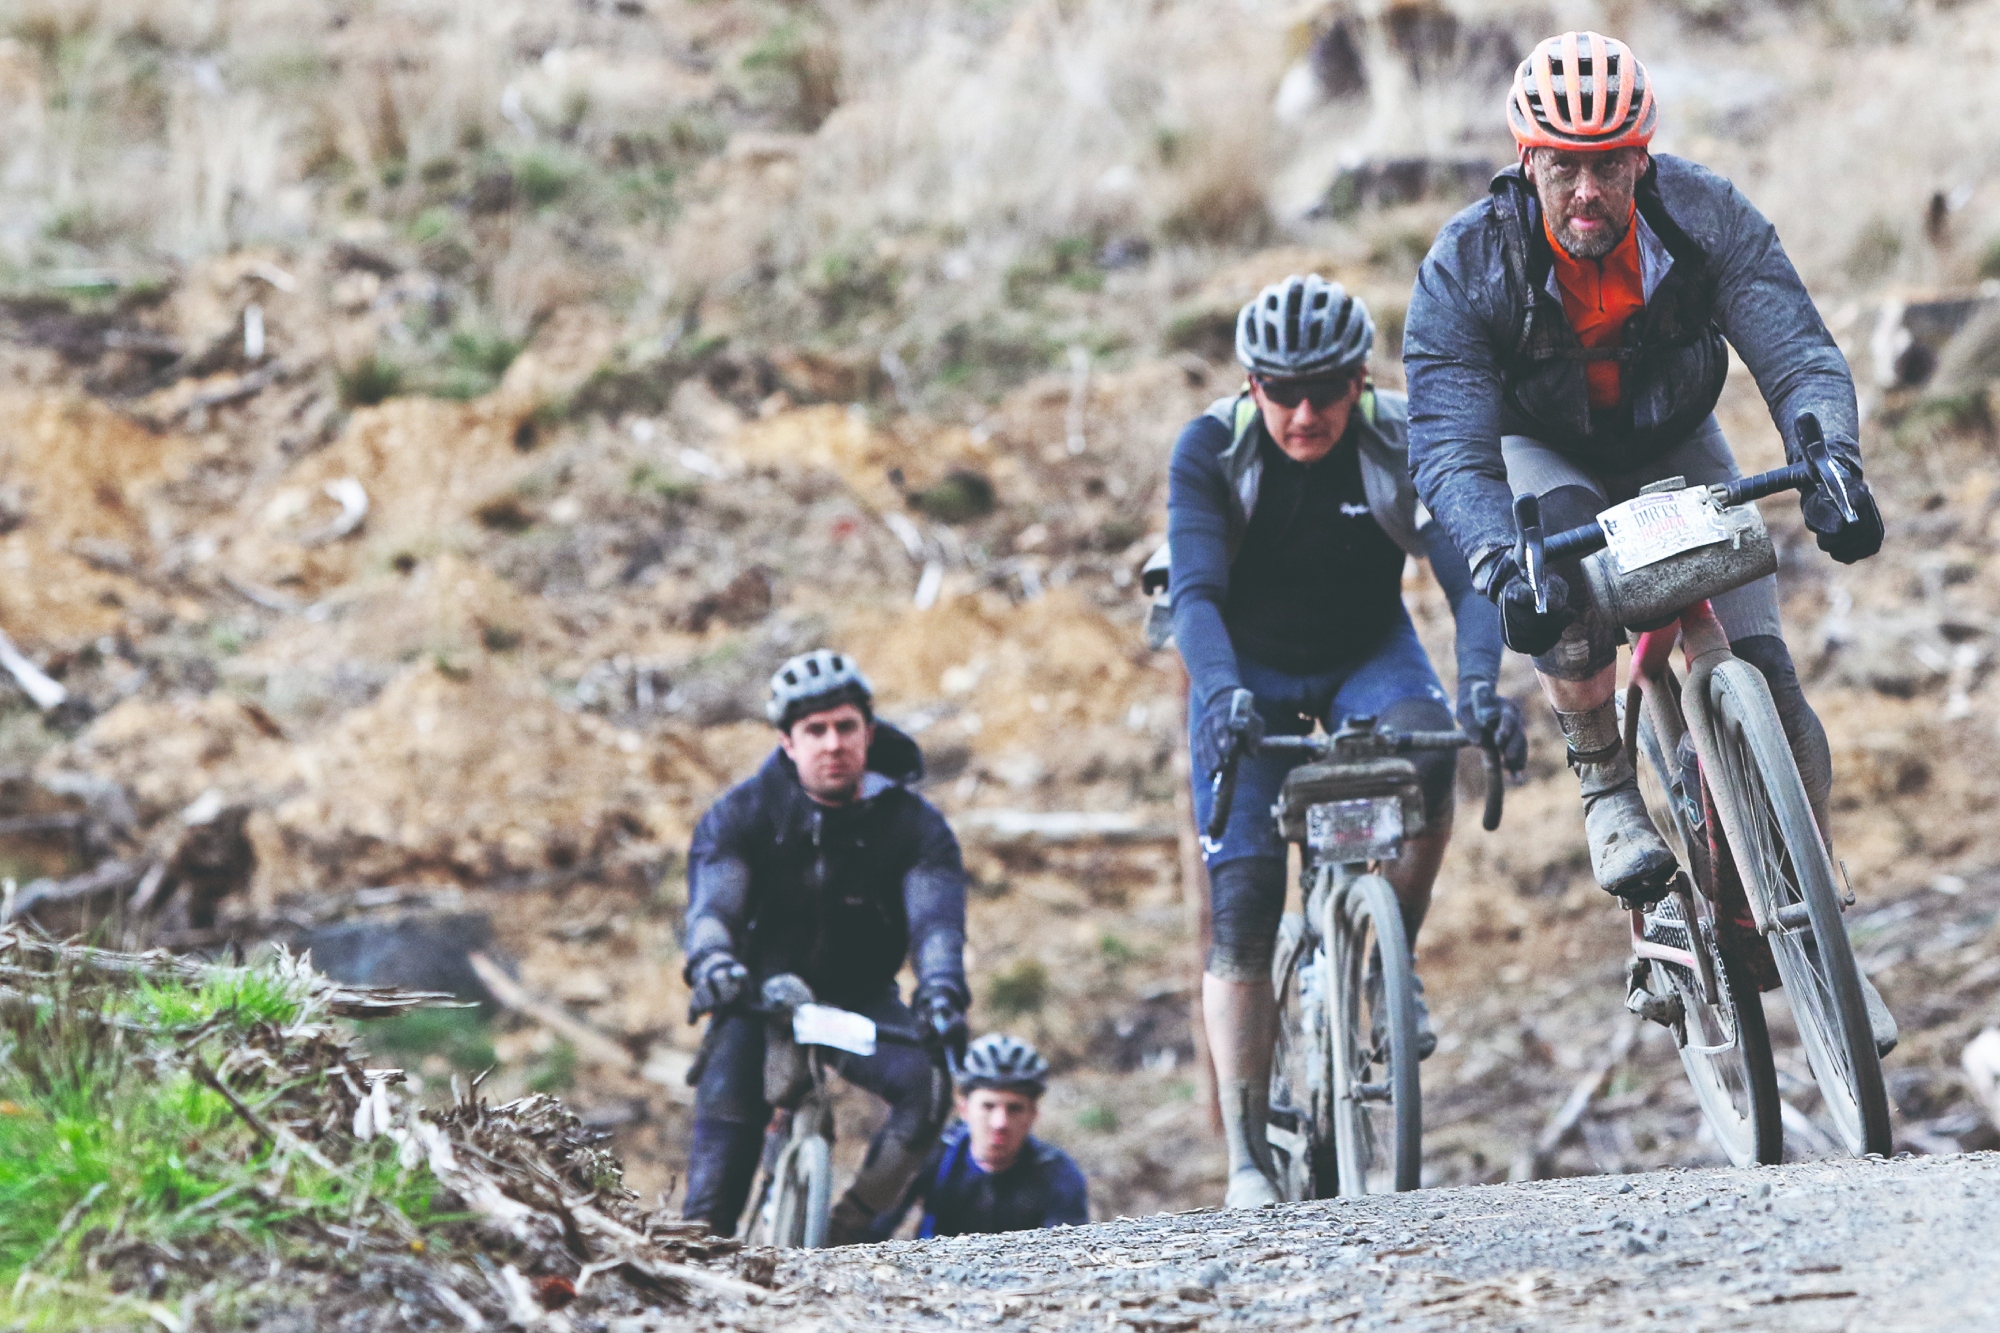 Gravel riders with filthy faces in the Dirty Reiver race in Northern England